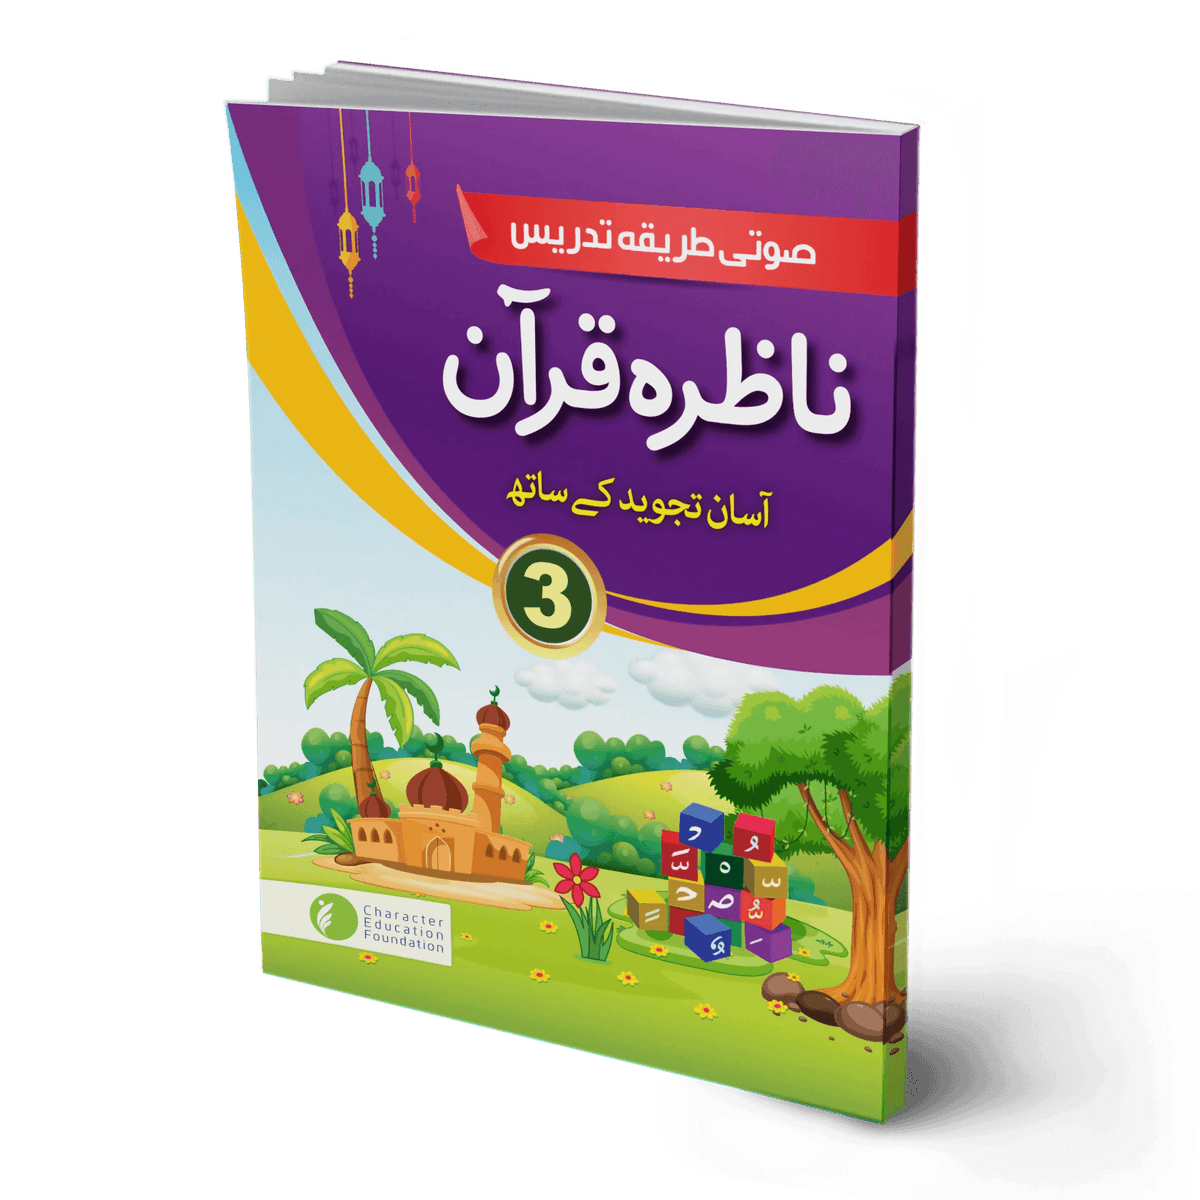 Character Education Foundation Nazra Quran Class 3 - ValueBox